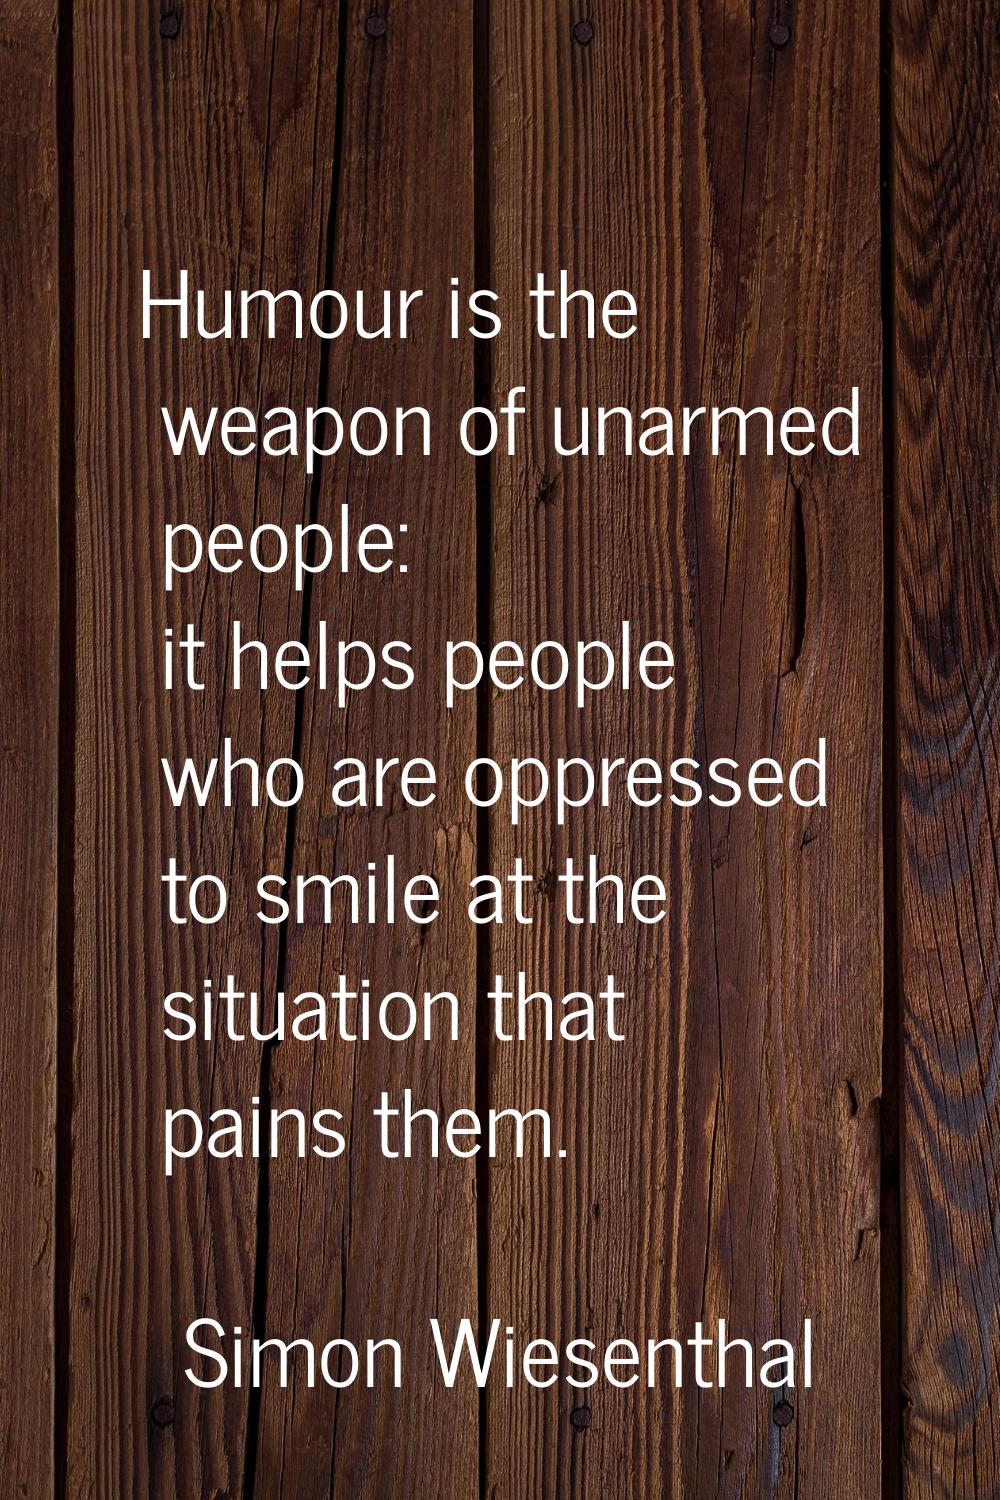 Humour is the weapon of unarmed people: it helps people who are oppressed to smile at the situation